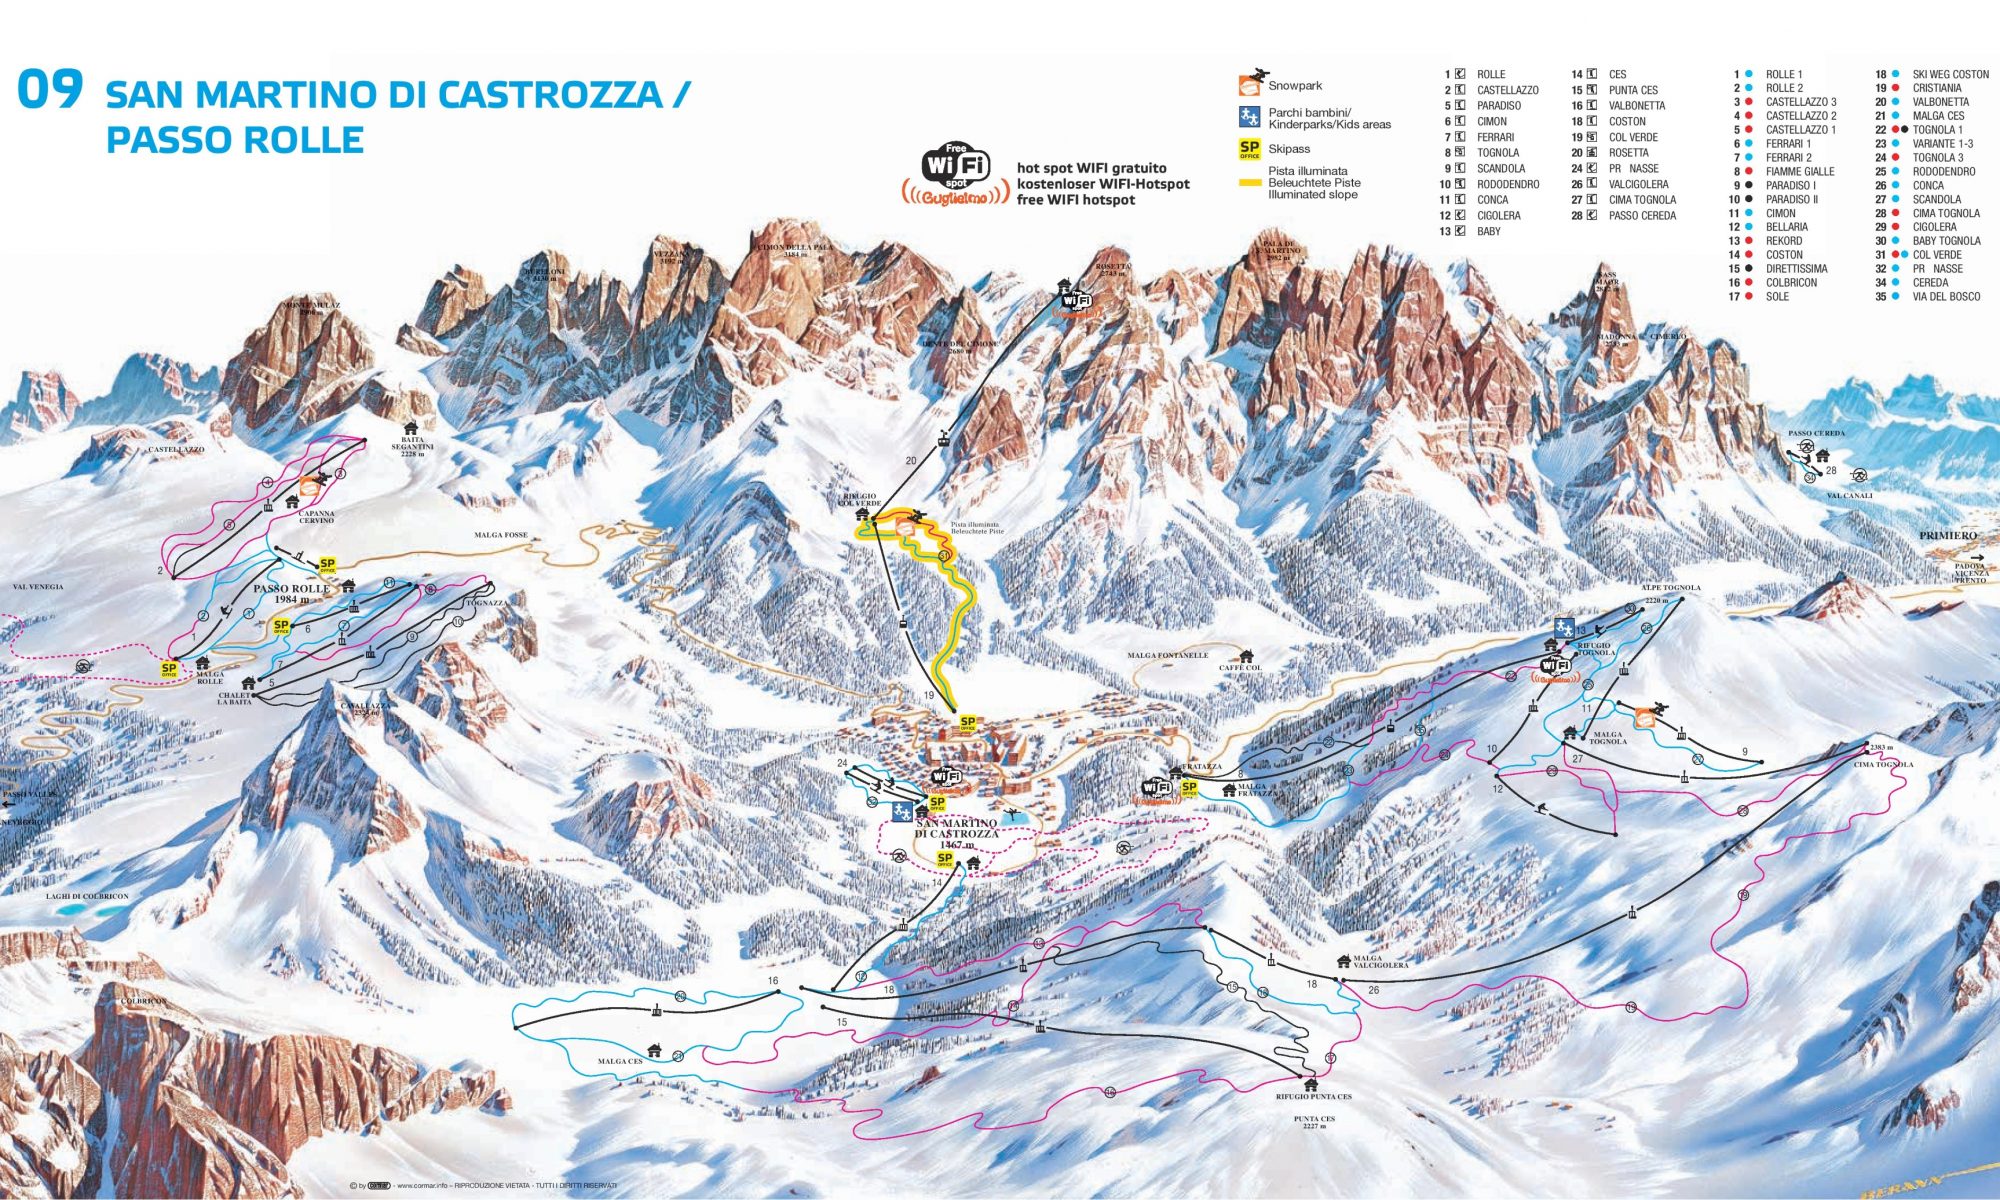 Ski map of Passo Rolle and San Martino di Castrozza. The Ferrari Chairlift has been reopened in record time at Passo Rolle, after being sabotaged.